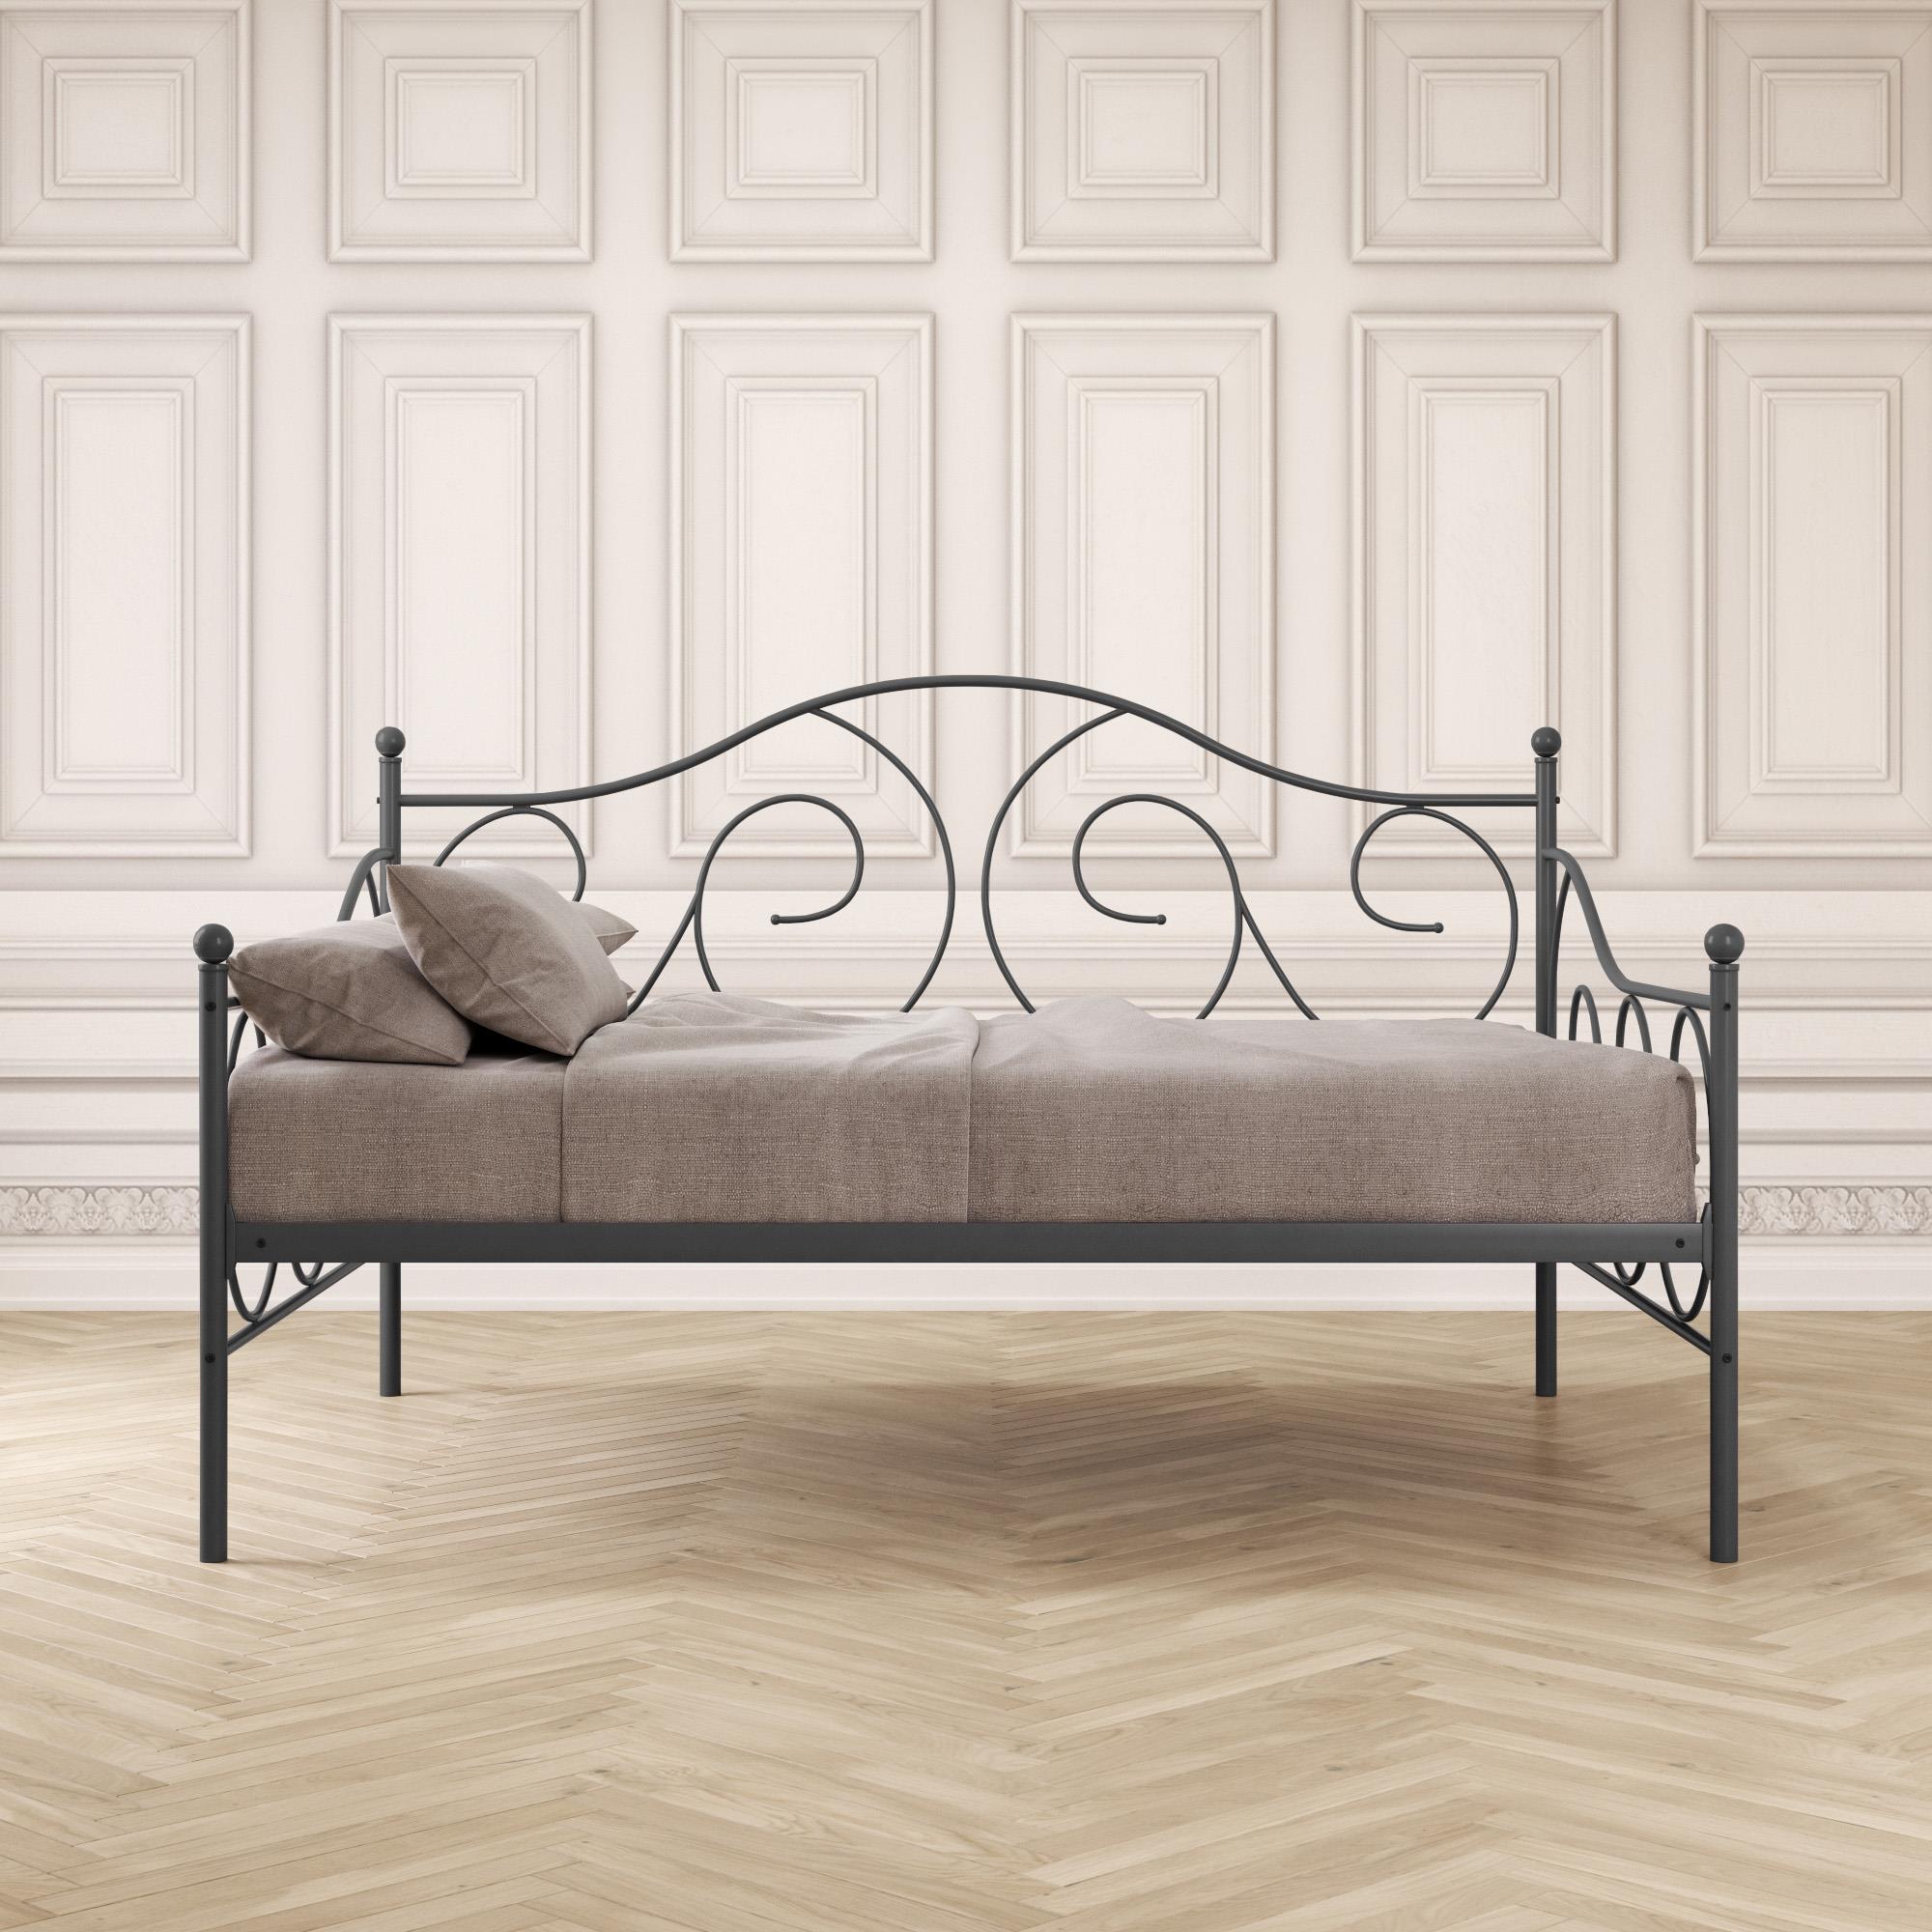 DHP Victoria Metal Daybed, Full, Pewter - image 5 of 24